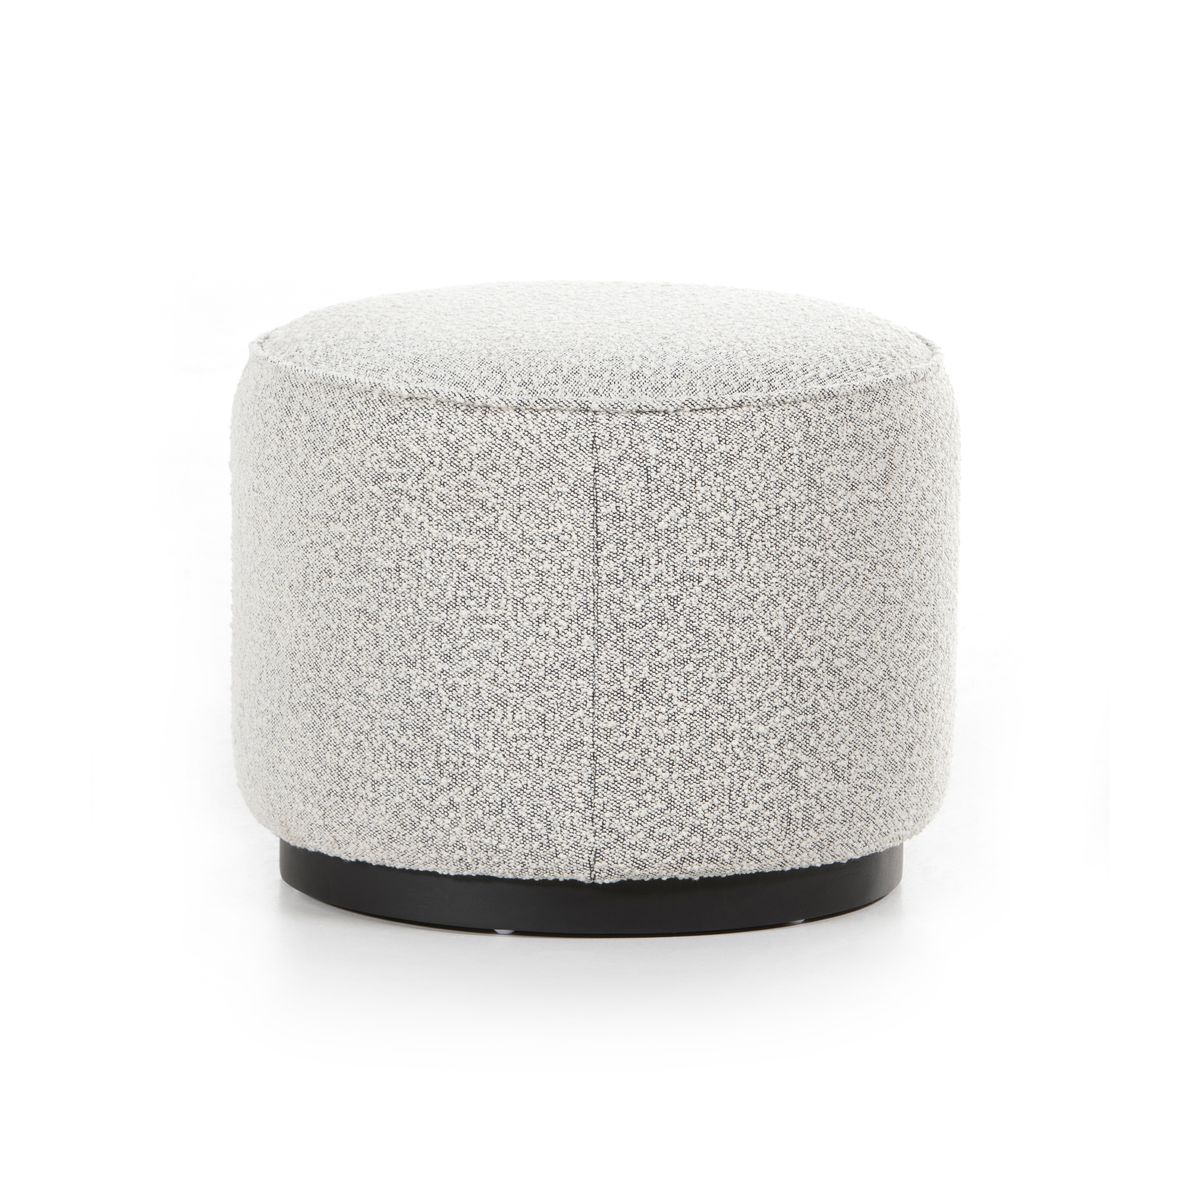 Shop Round Ottoman, Black and White Boucle from Peggy Haddad Interiors Home on Openhaus